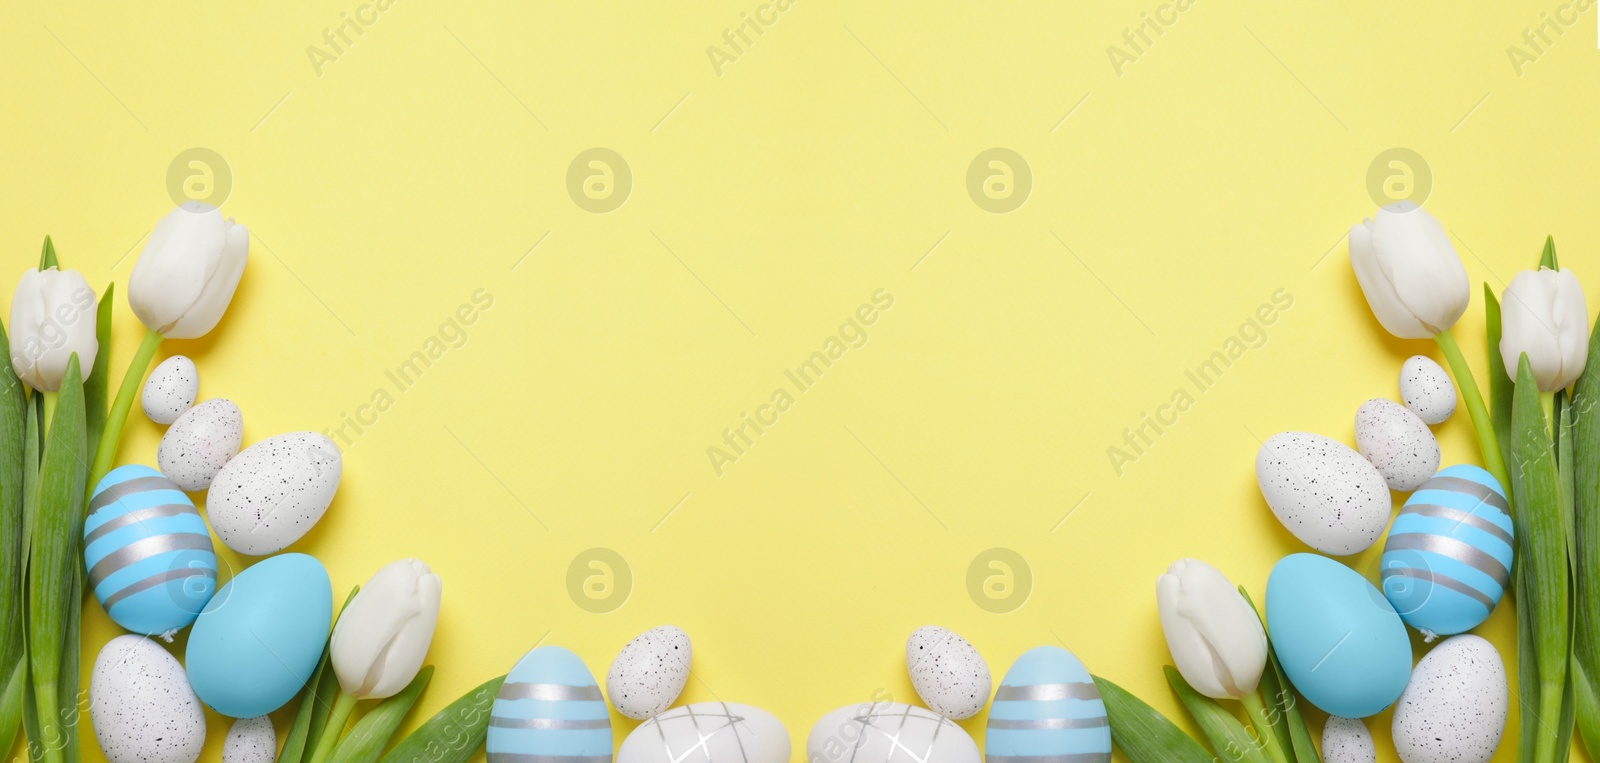 Image of Flat lay composition with decorated Easter eggs and flowers on pale yellow background, space for text. Banner design